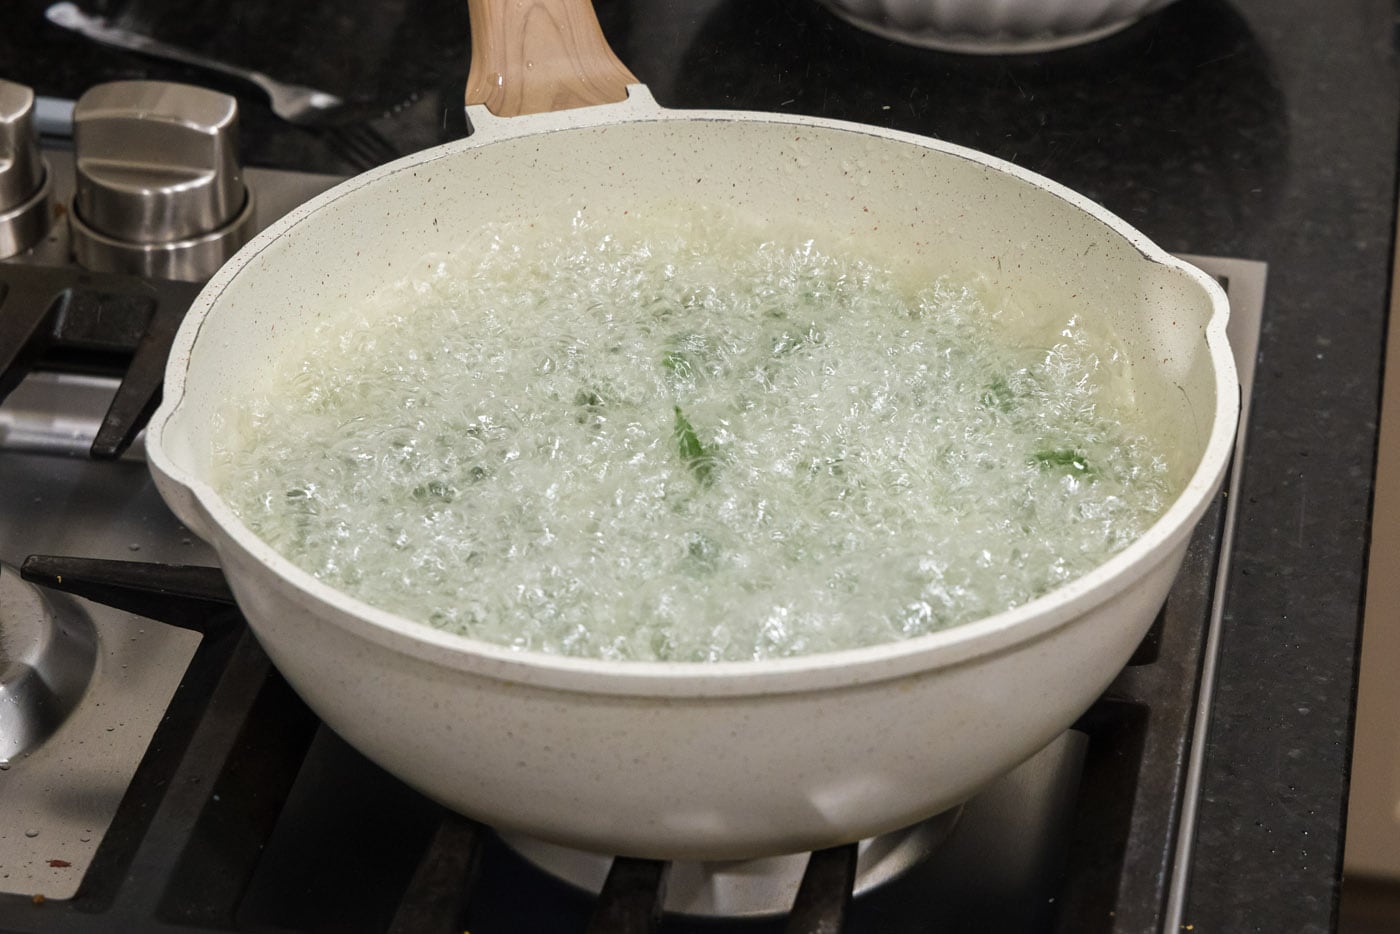 frying spinach in oil